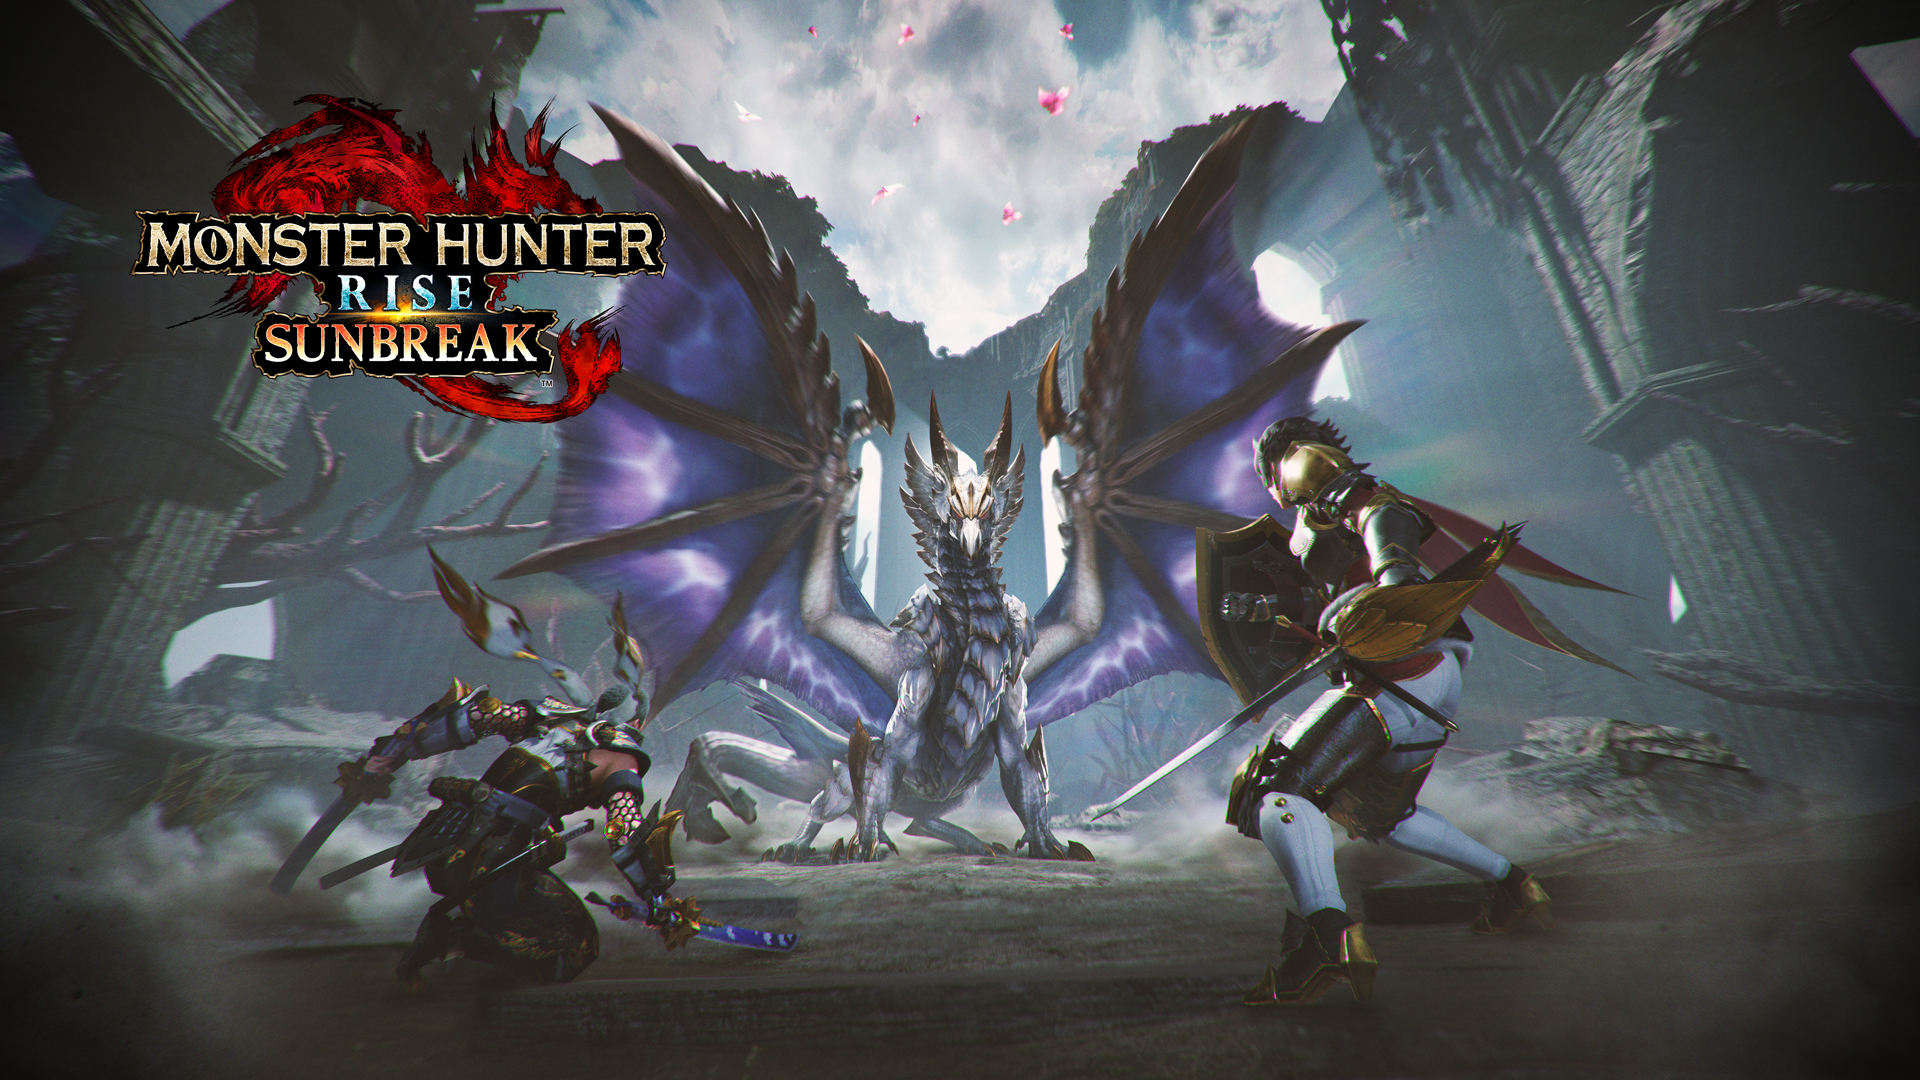 Monster Hunter Rise: Sunbreak expansion Title Update 4 launches